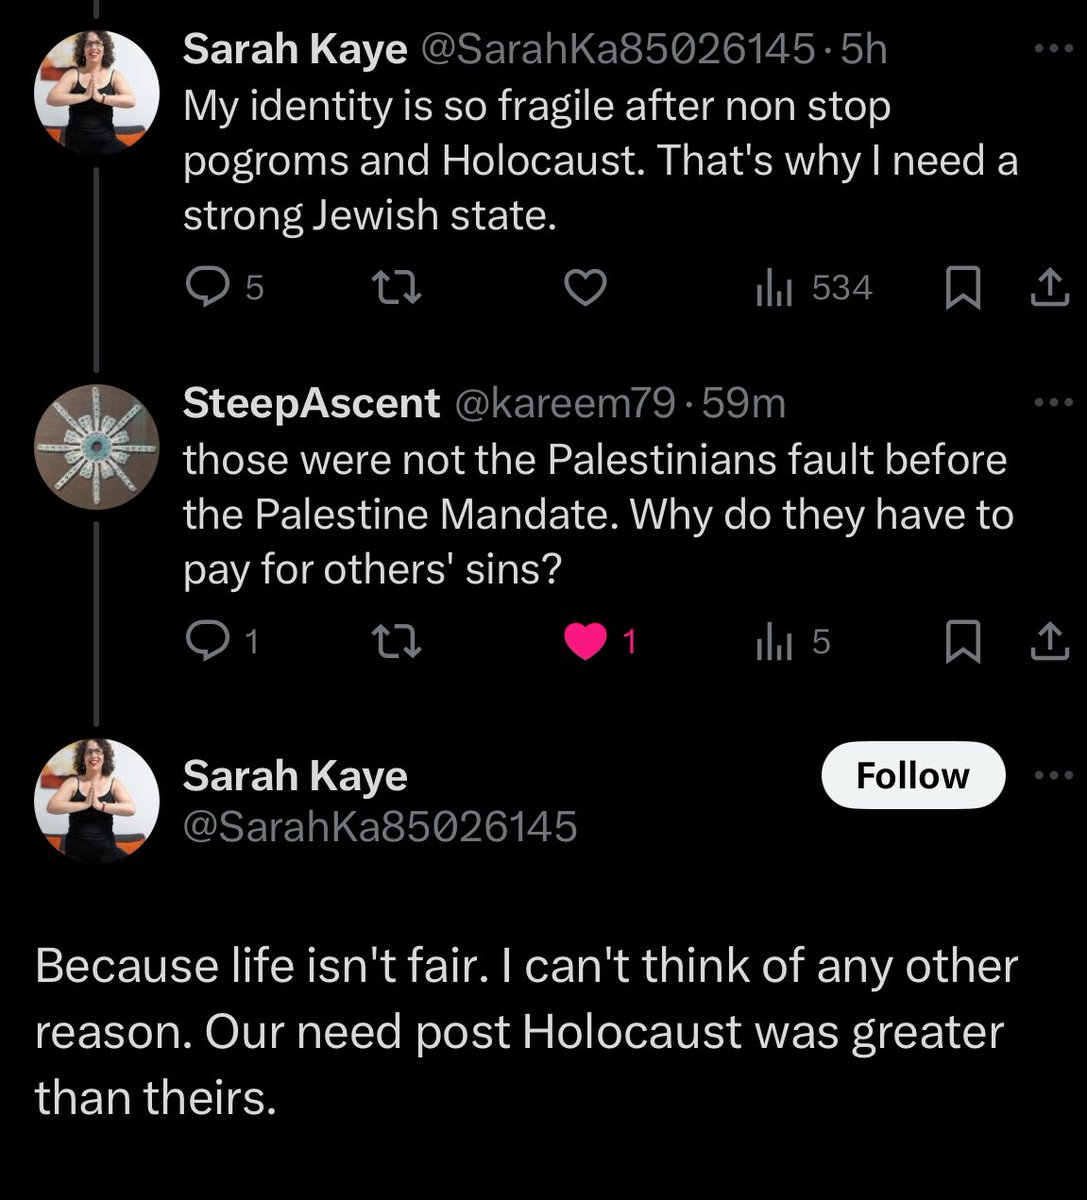 This is a fascinating exchange, mostly because, while I vehemently oppose Sarah’s position, she is actually being honest to how she feels (in spite of that being deeply wrong and unjust). There are no attempts to weaponise antisemitism as a tool of misdirection, but instead an